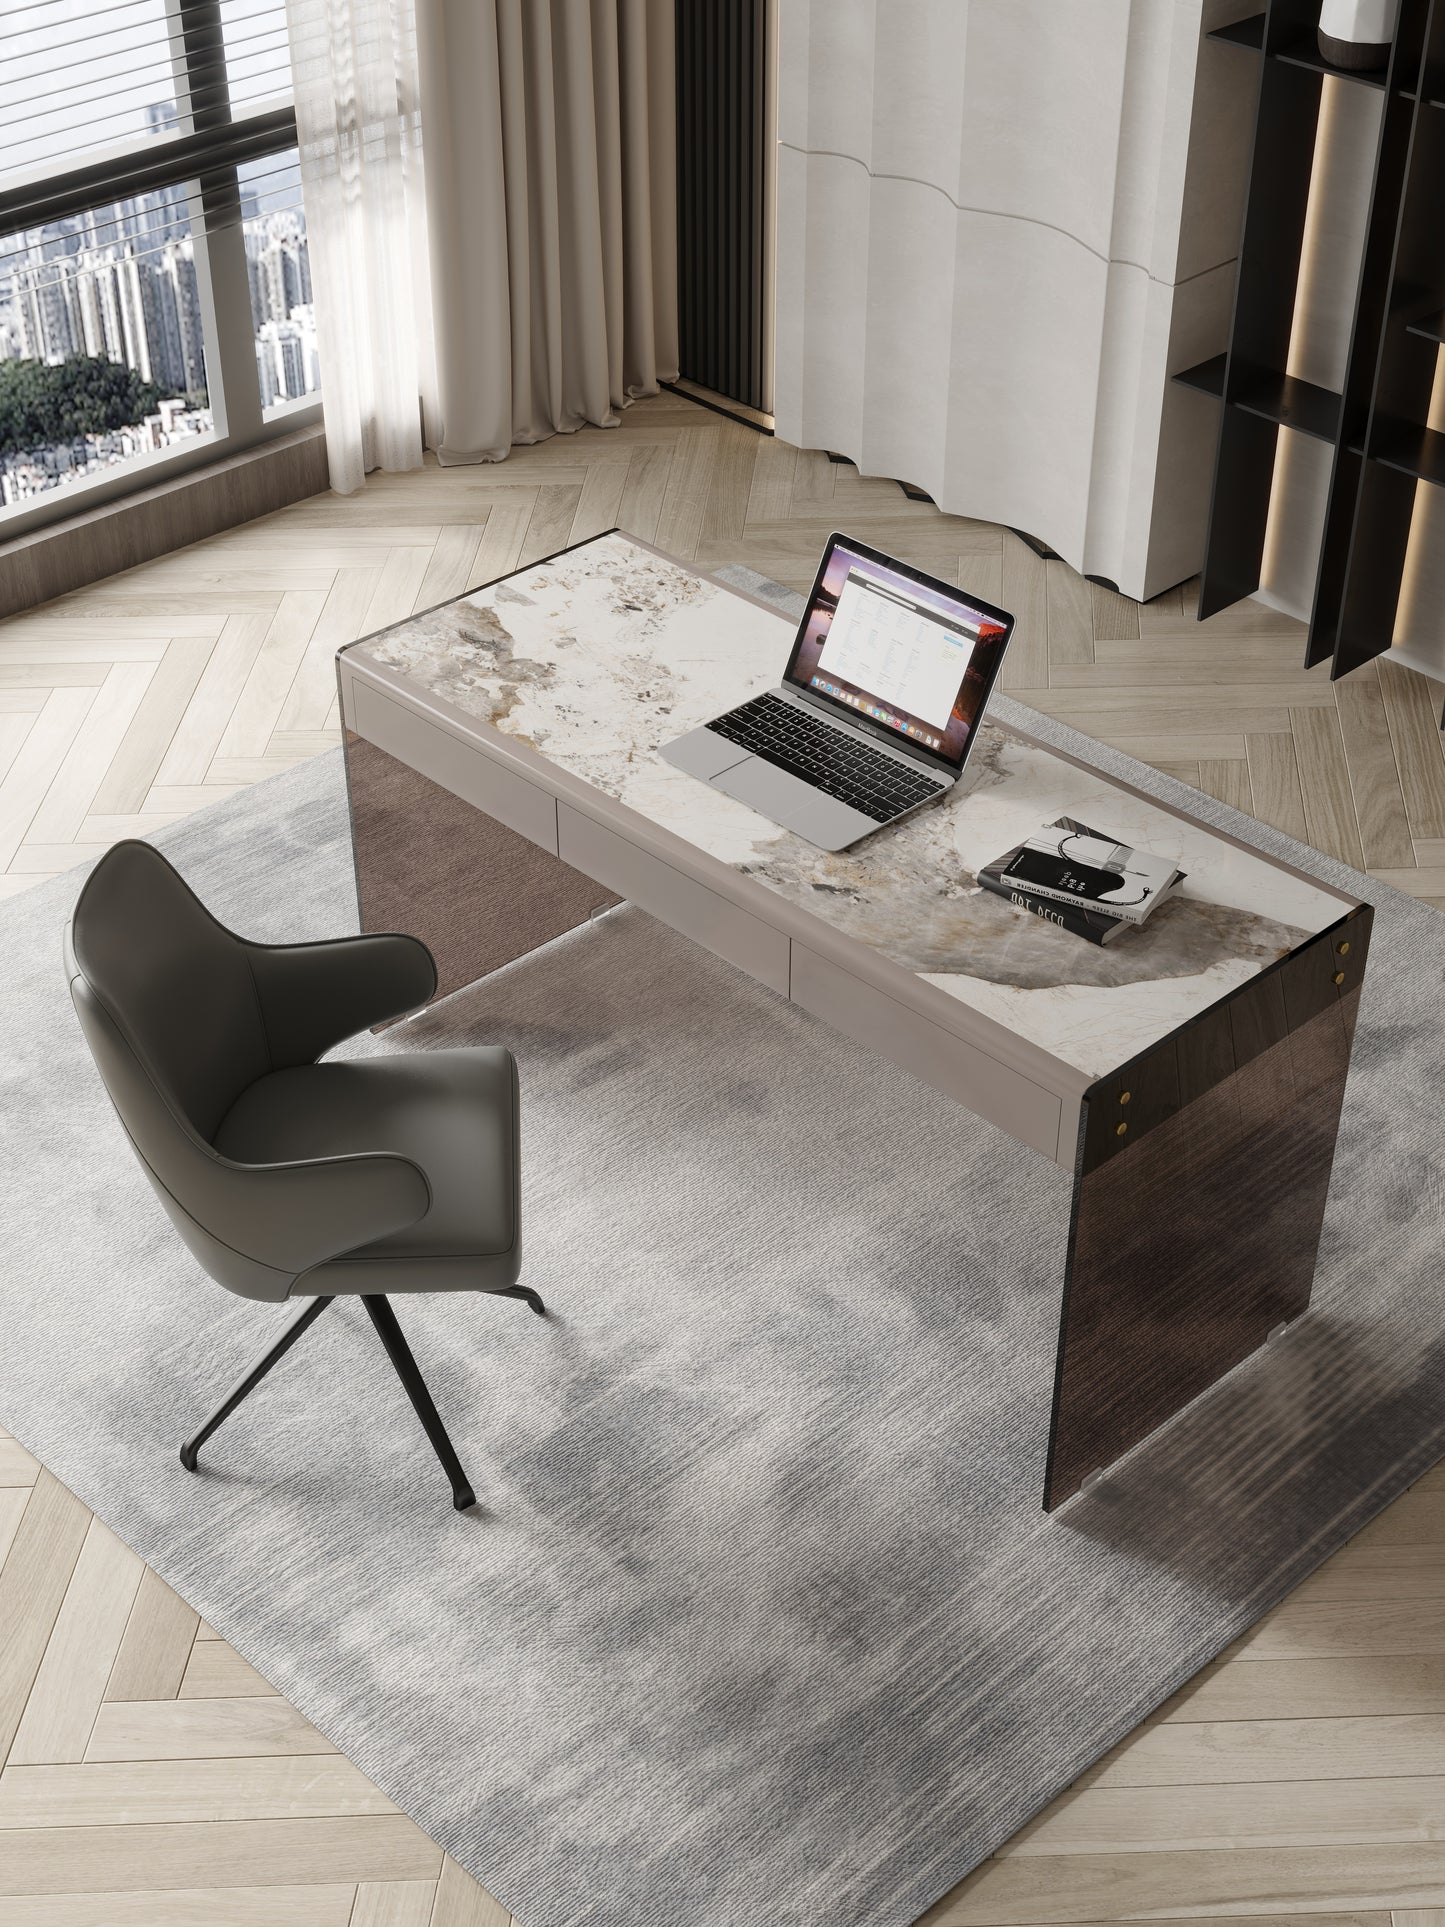 Angelo Sintered Stone Top Designer Study Desk With Drawers Glass Stand Home Office Desk 1.6m